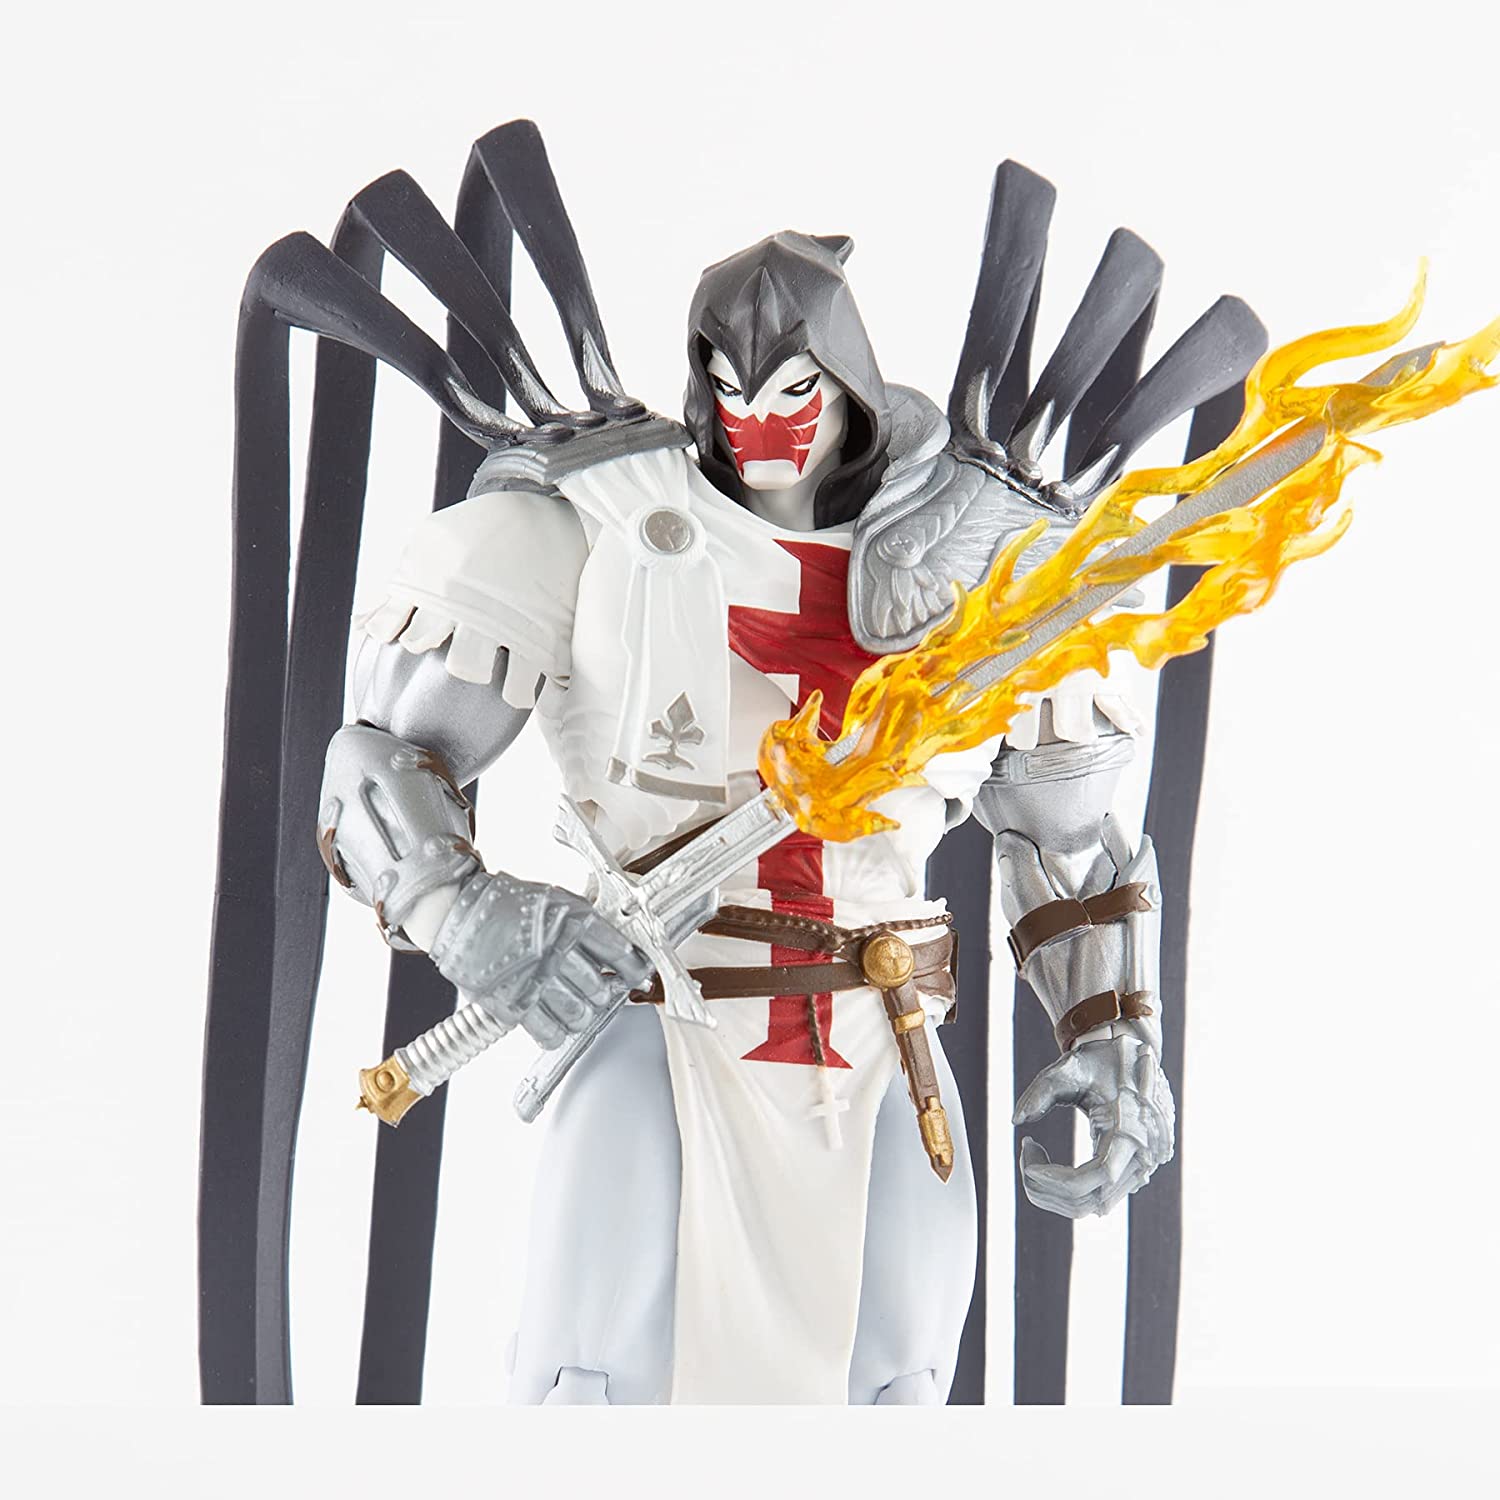 McFarlane Toys - DC Multiverse - Gold Label Collection - Azrael White Templar 7 Inch Action Figure, Multicolor - Action & Toy Figures Heretoserveyou